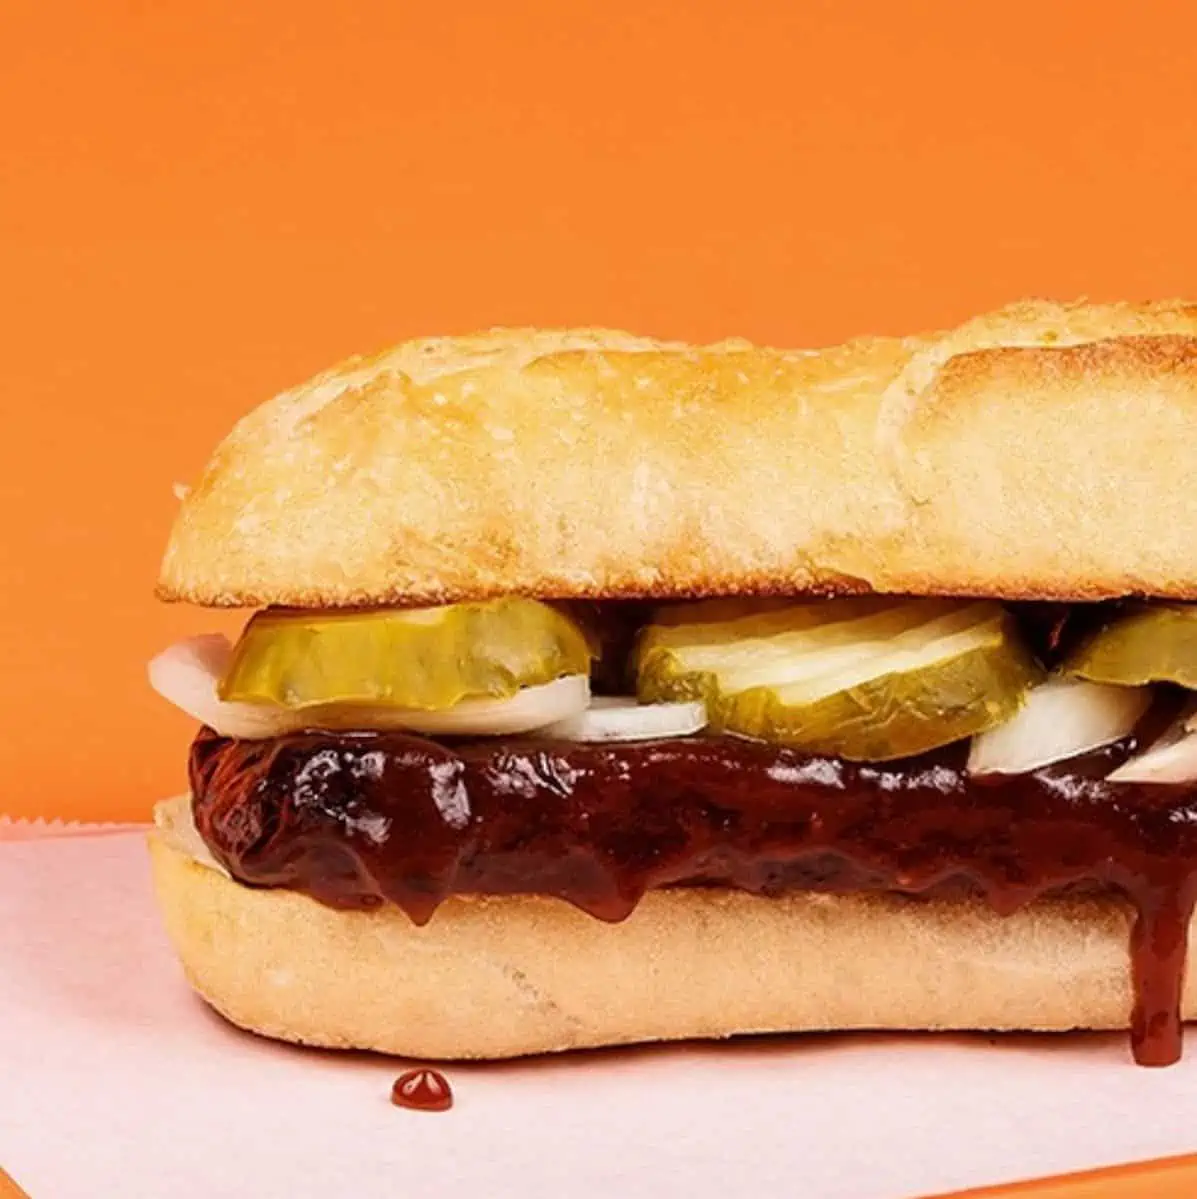 A VeggRib sandwich dripping with sauce.